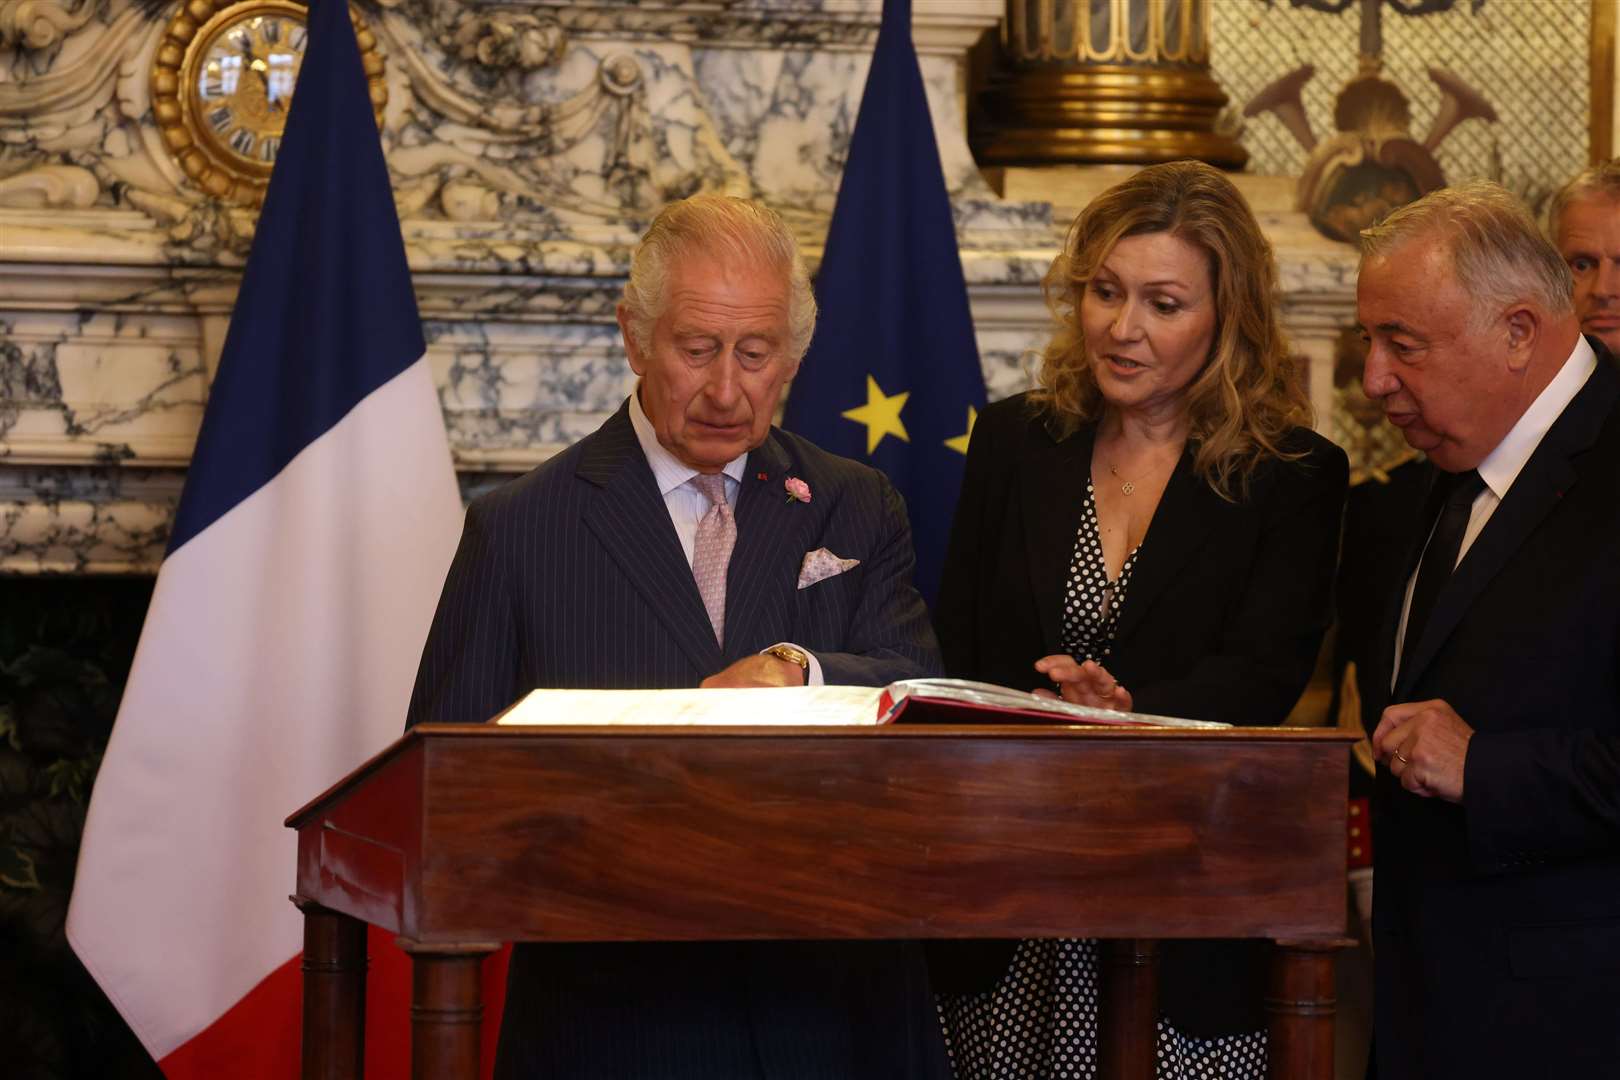 The King, watched by the President of the Senate, Mr Gerard Larcher, and the President of the National Assembly, Mrs Yael Braun-Pivet, signing the visitors book (Ian Vogler/Daily Mirror/PA)